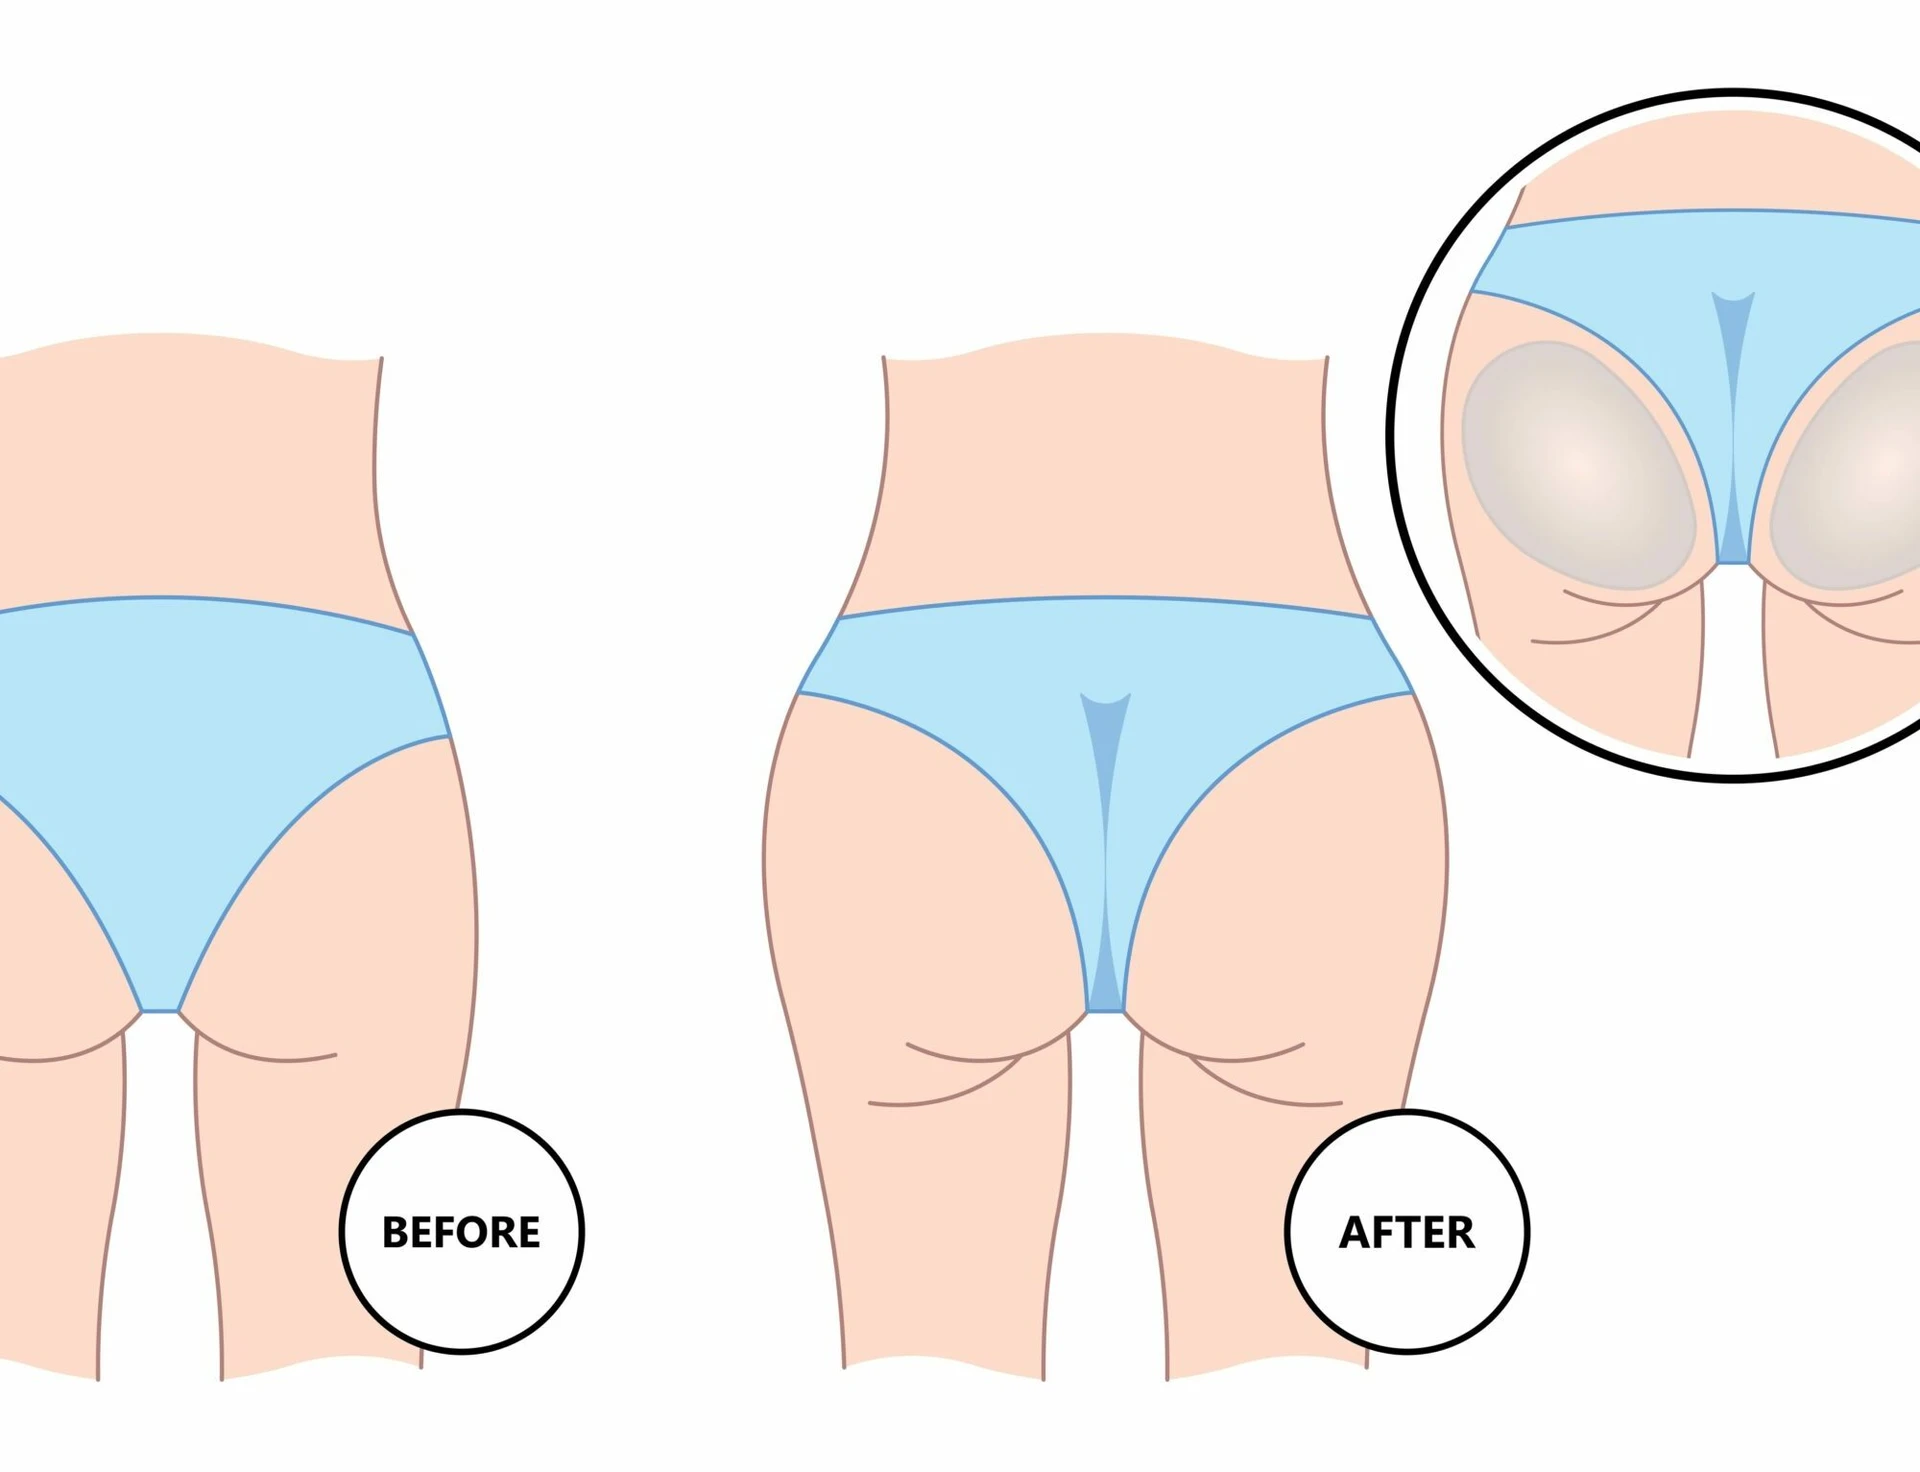 Shaping garments to tighten the abdomen, lift the buttocks, and get ri